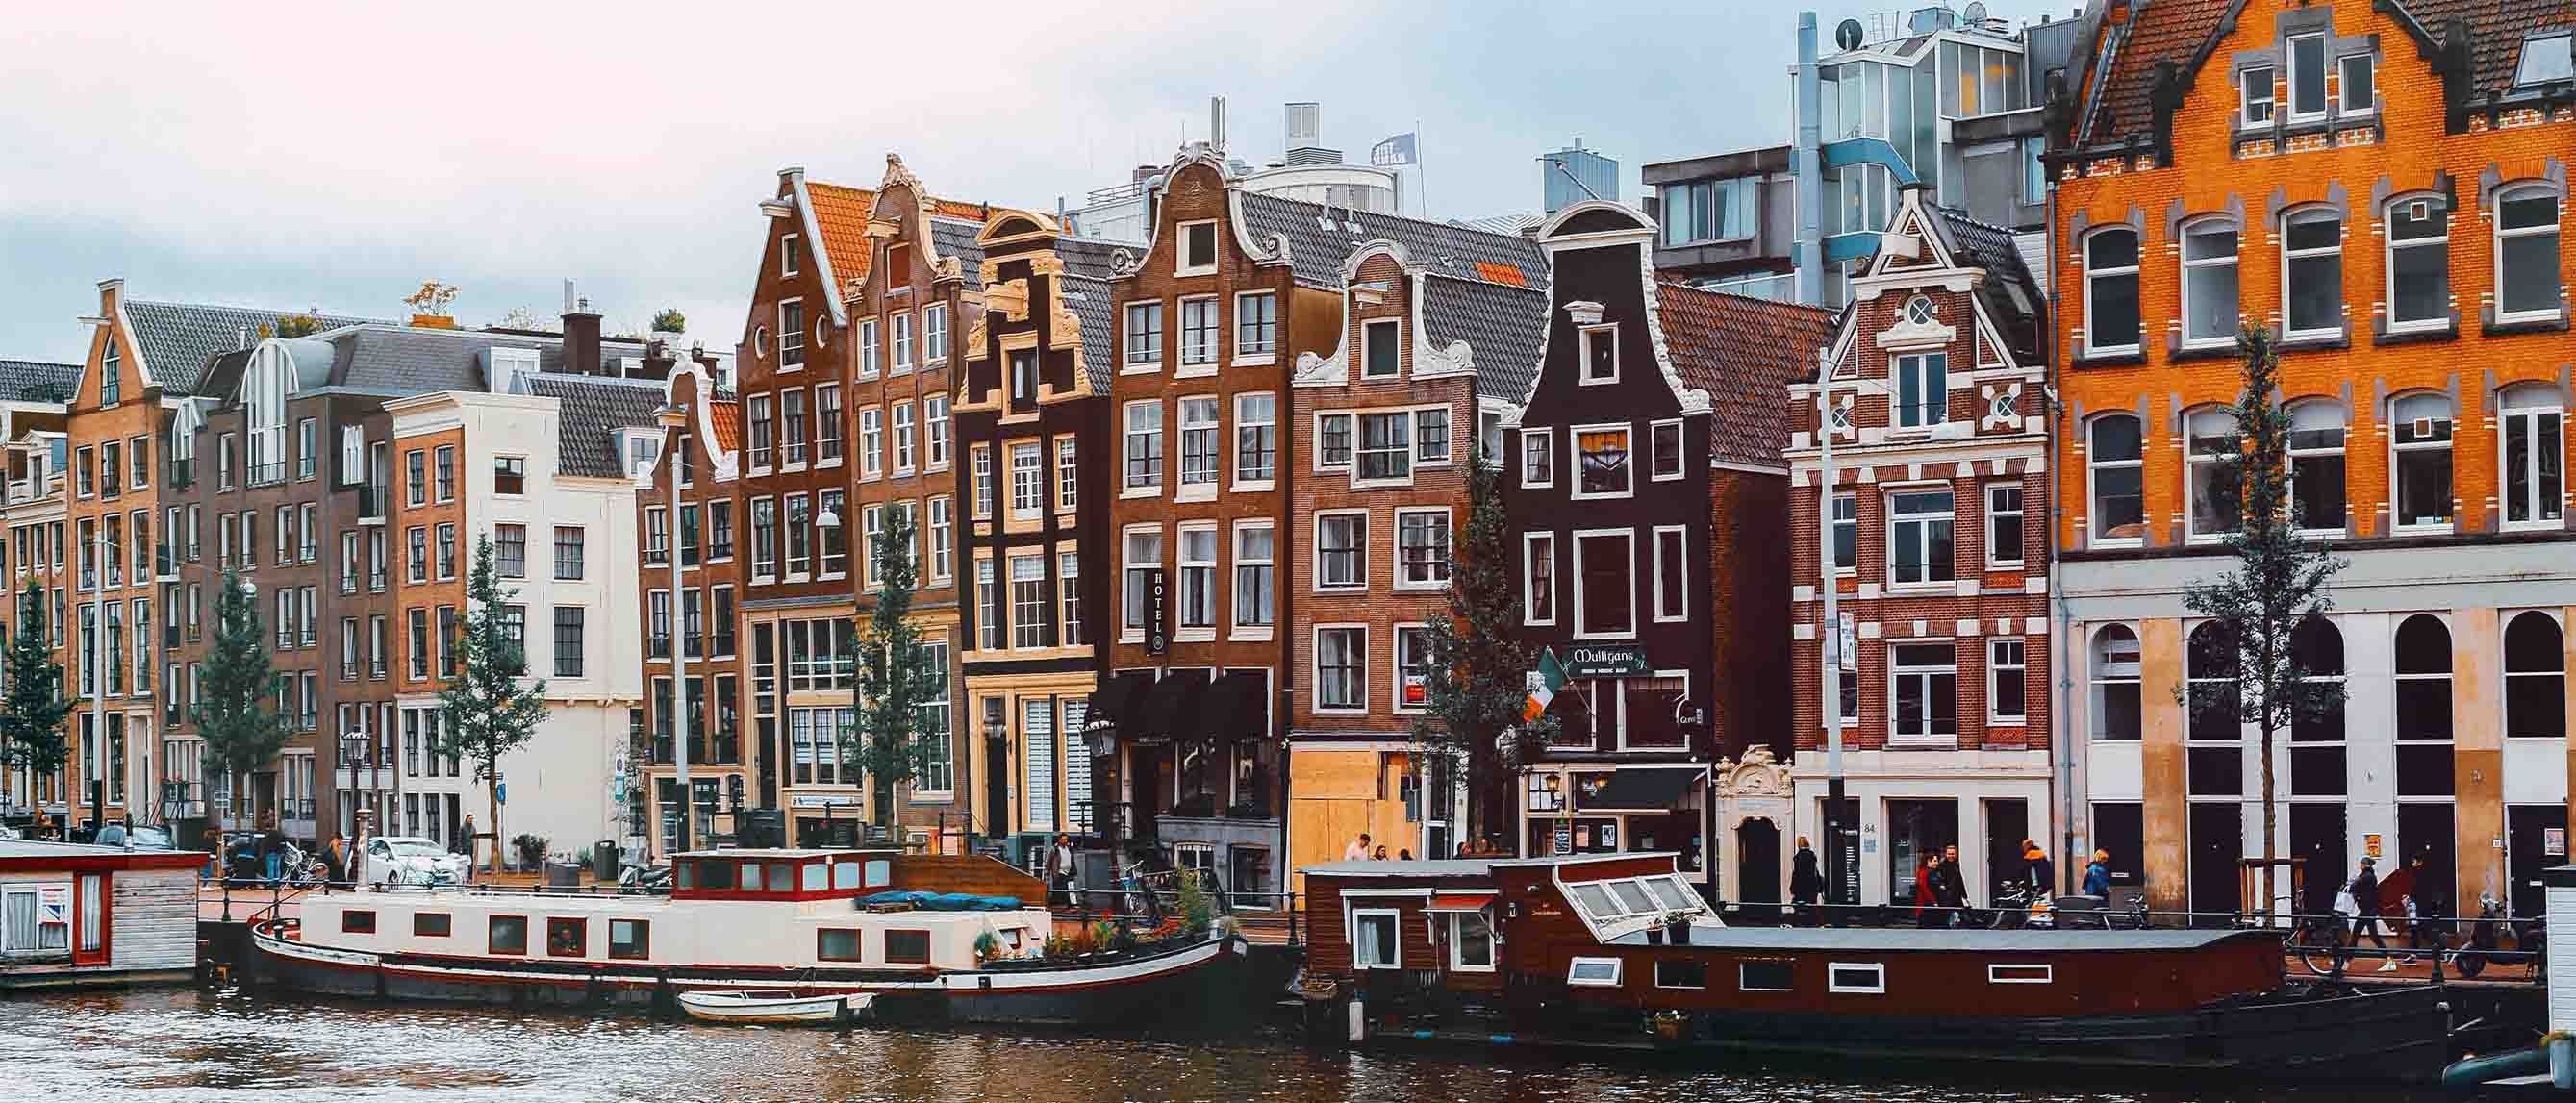 What are the best things to do in Amsterdam? Our 8 top picks